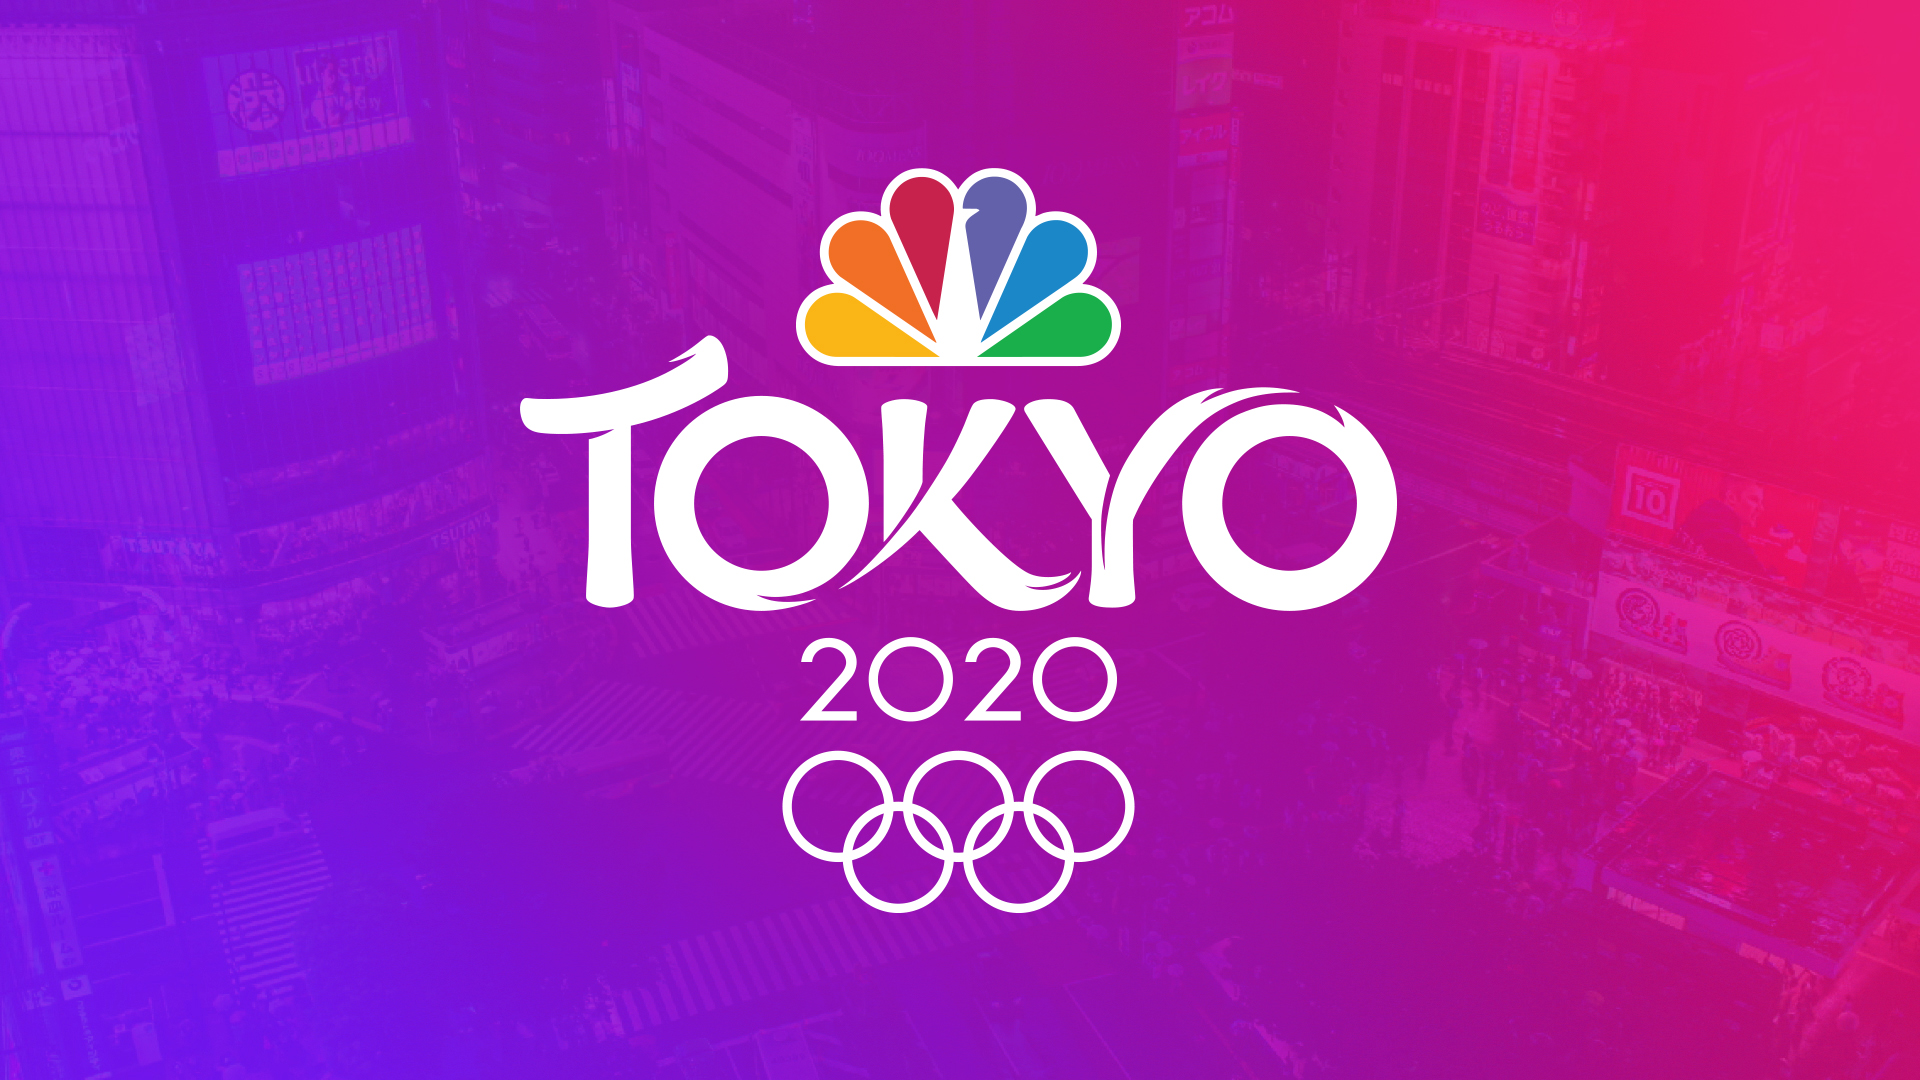 Sign up for the Tokyo 2020 Newsletter, get your Olympics news